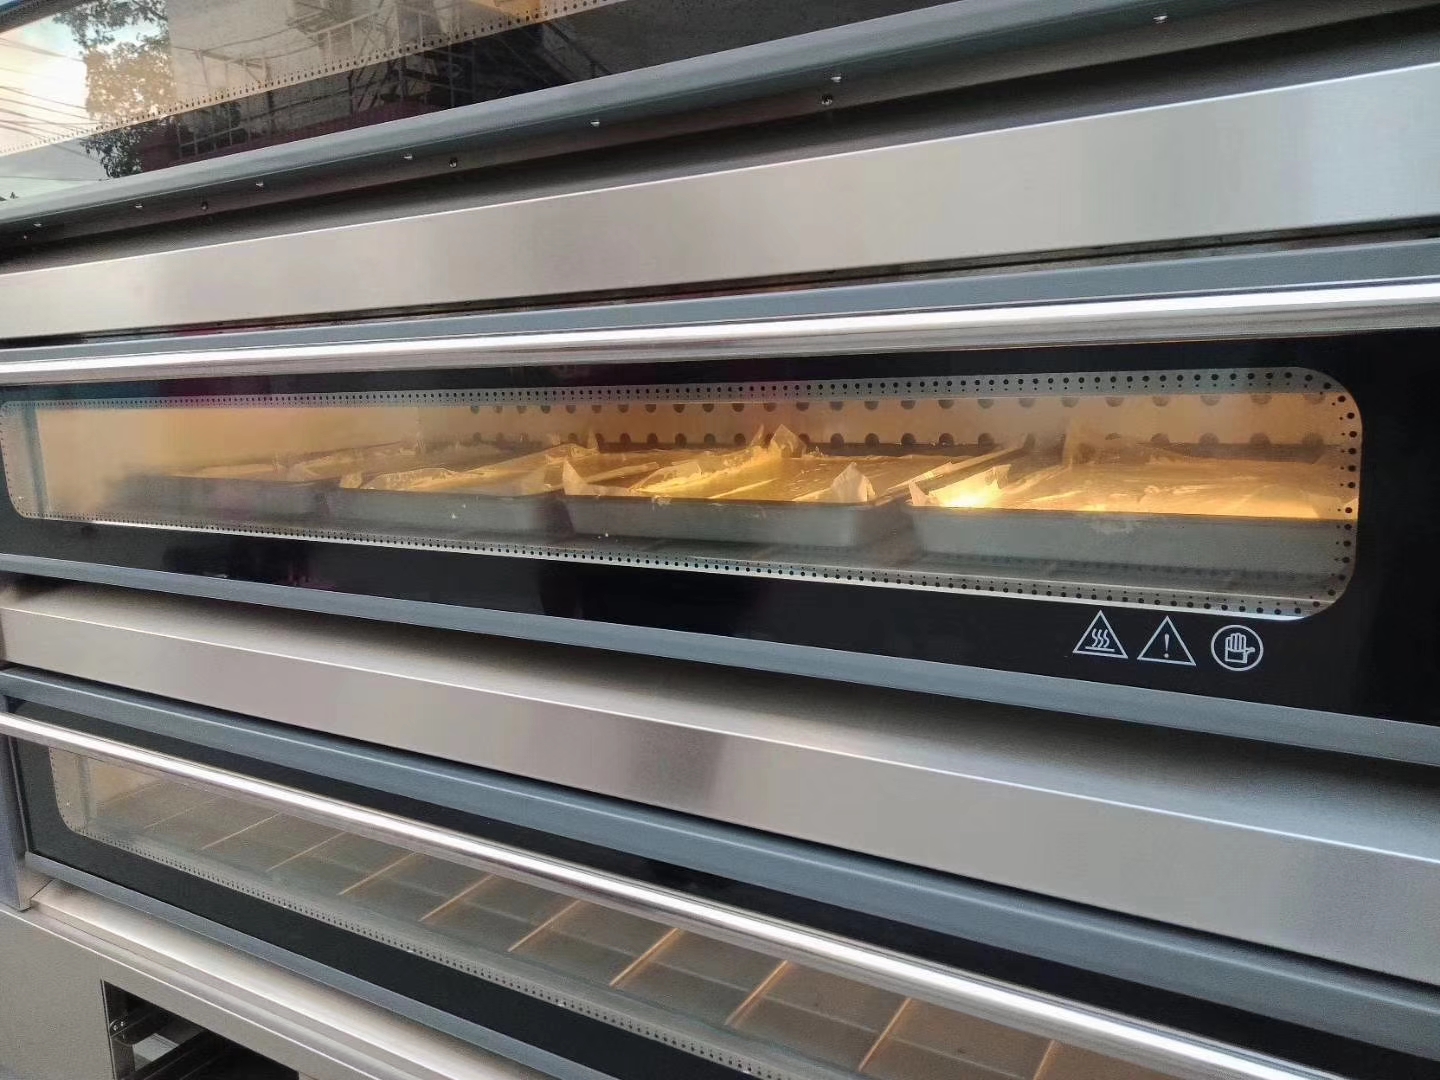 Commercial Deck oven bakery electric/ gas oven bakery oven